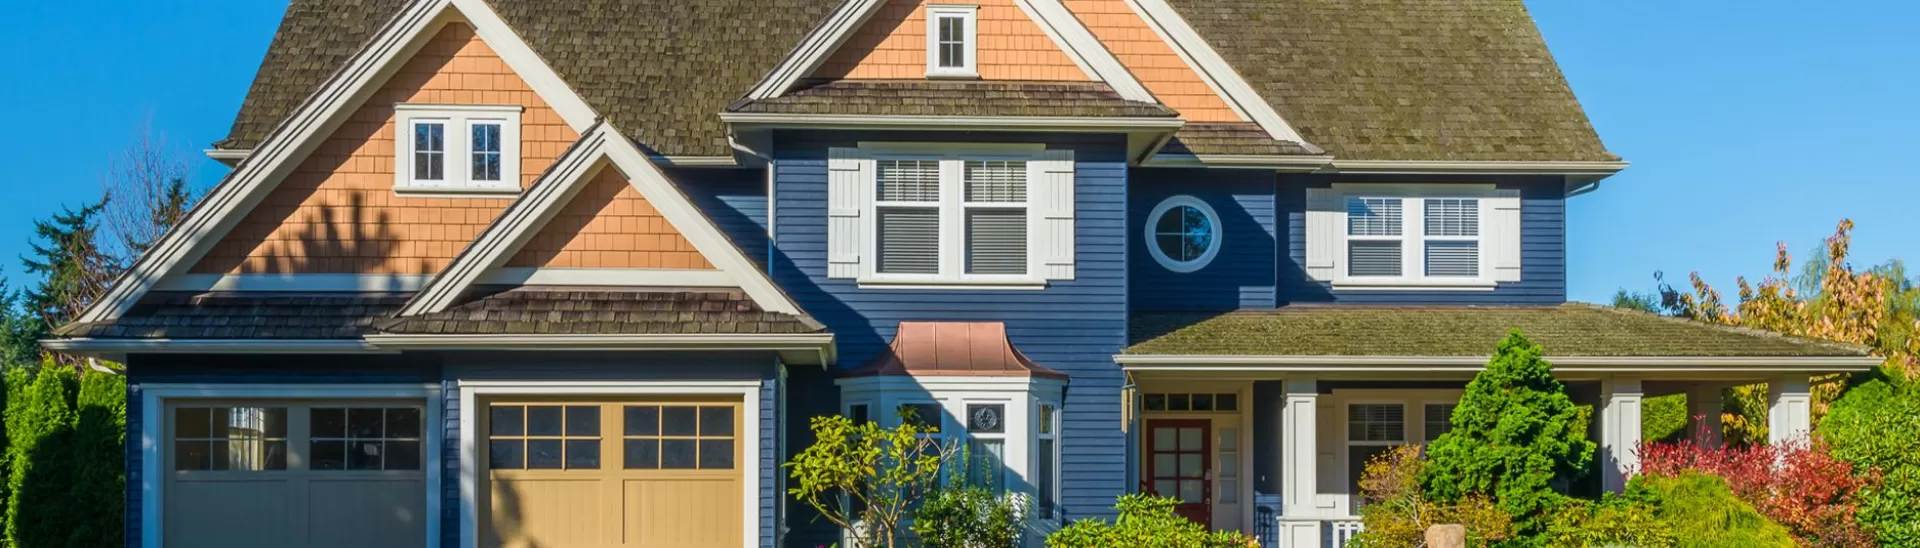 Vibrant Home Exterior Colours That Turn Heads